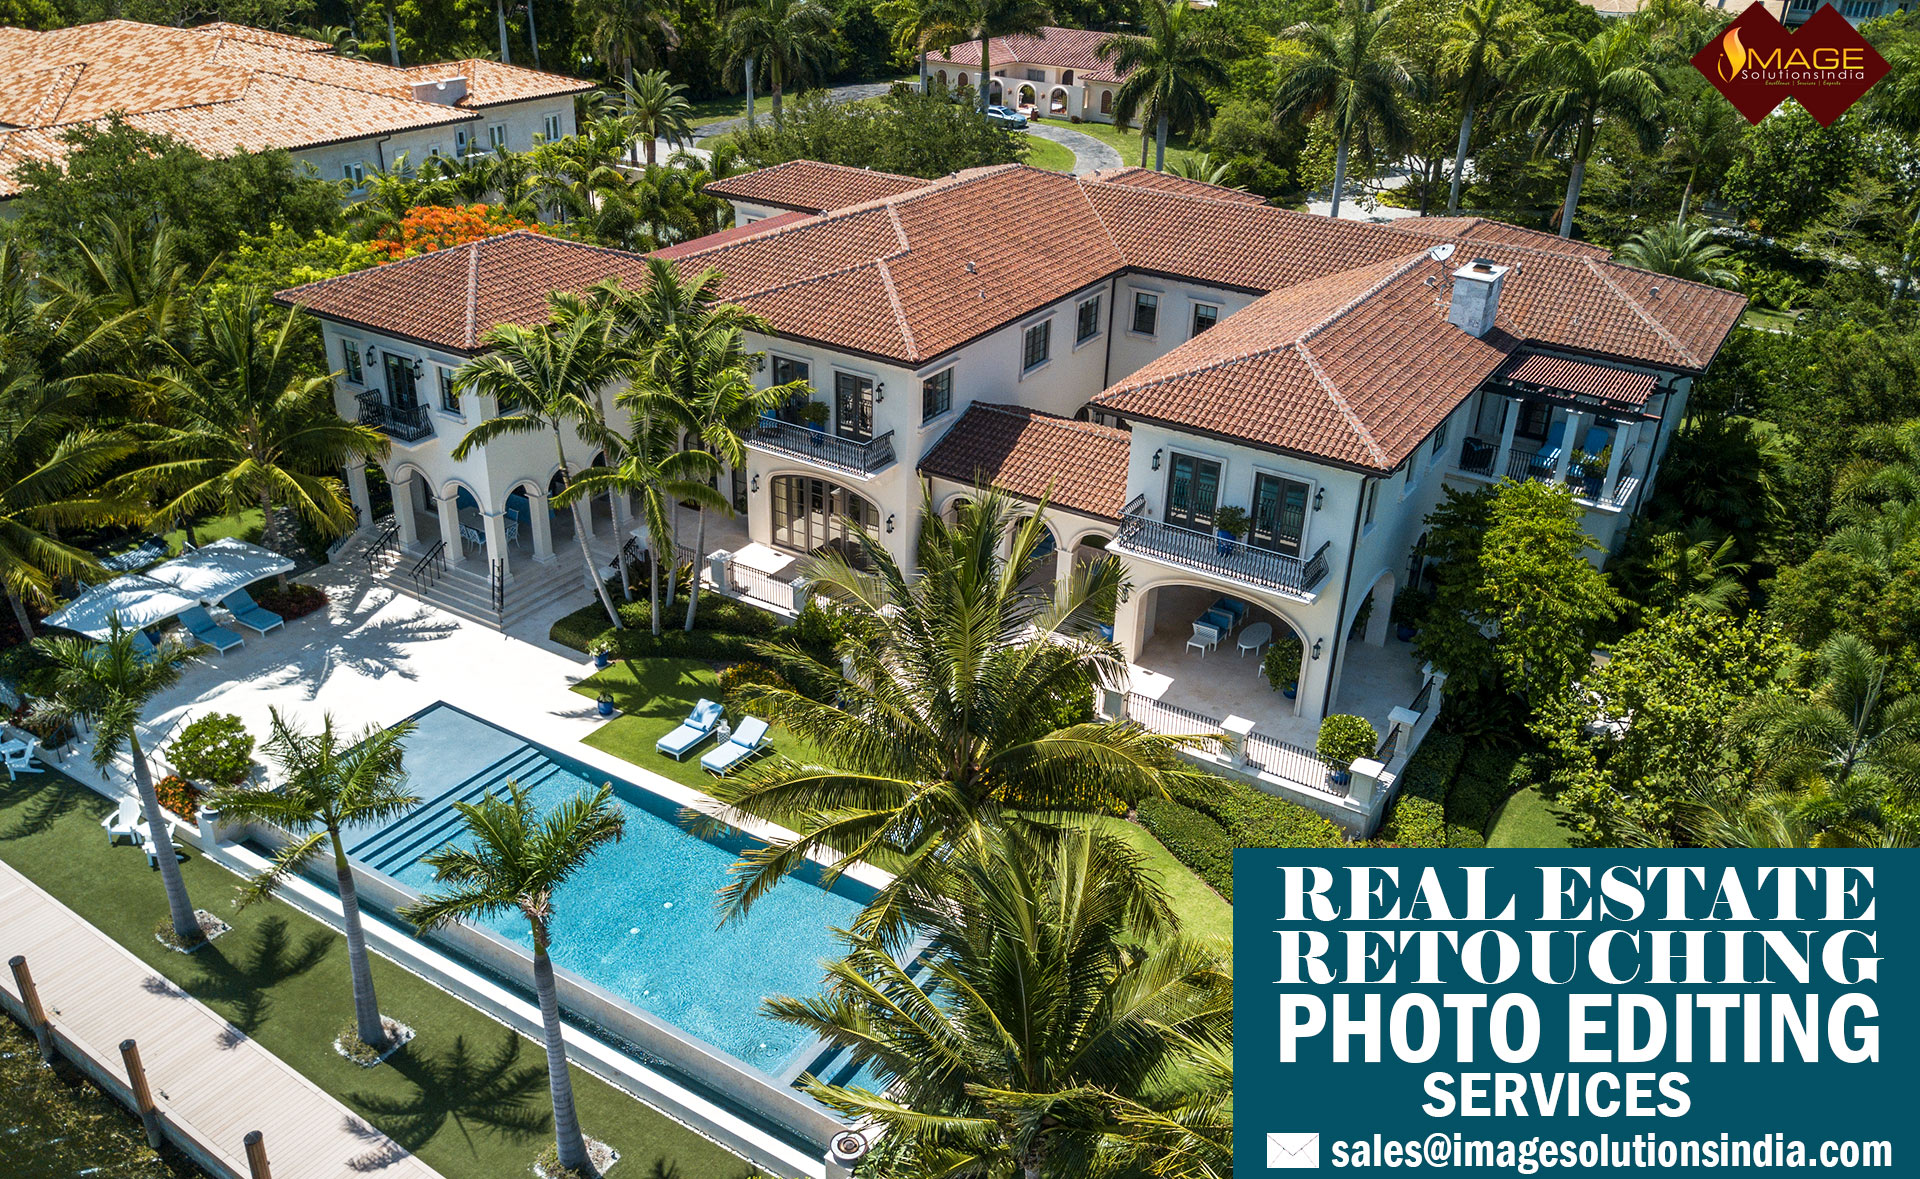 Real Estate Image Correction Services